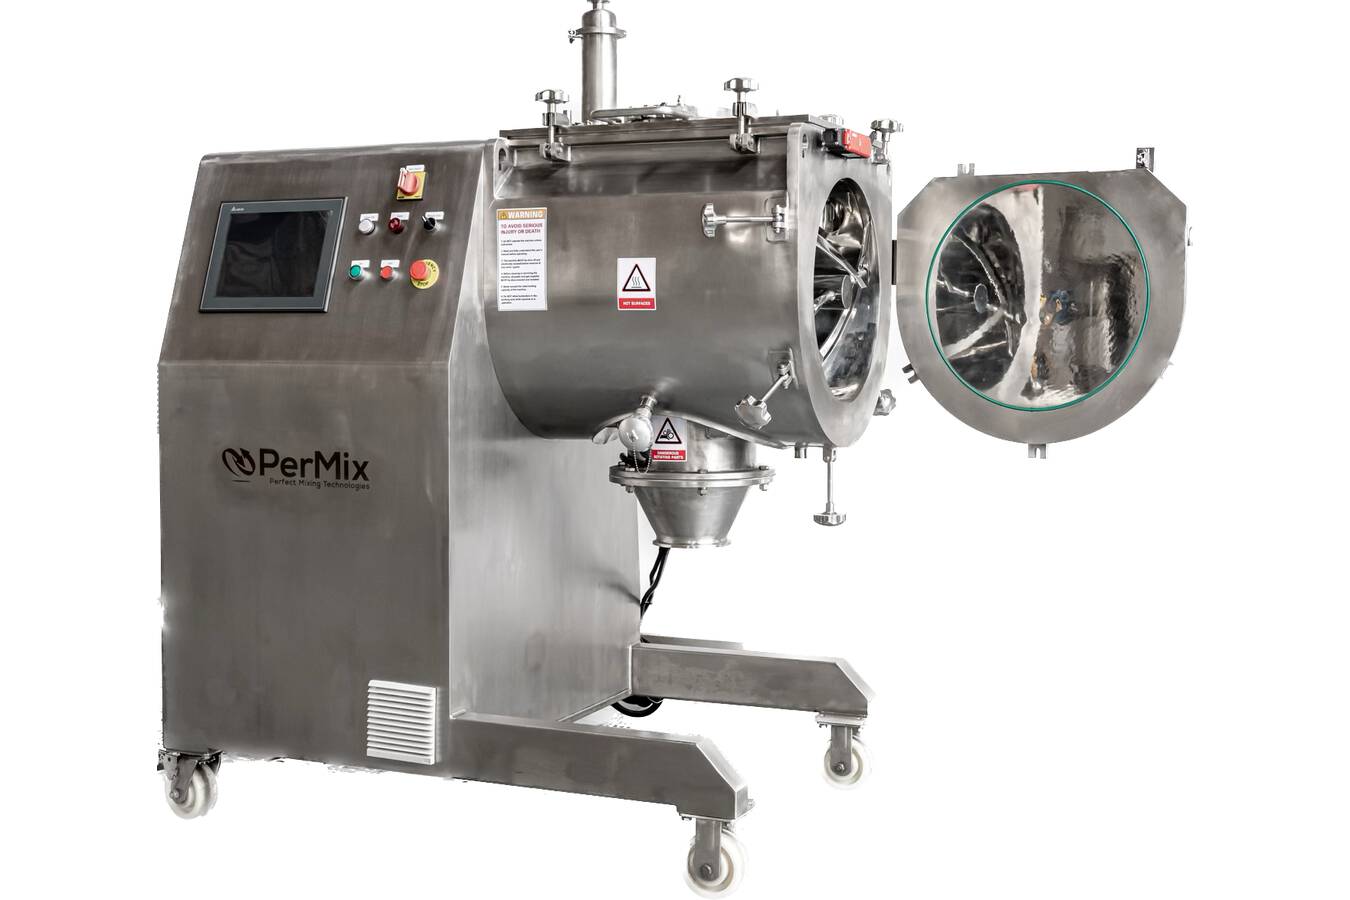 PerMix 4-in-1 Mixer Unveiled At POWTECH  The PerMix 4-in-1 mixer is a belt mixer, paddle mixer, plough mixer and a vacuum mixer/dryer with fluidised zone in one machine